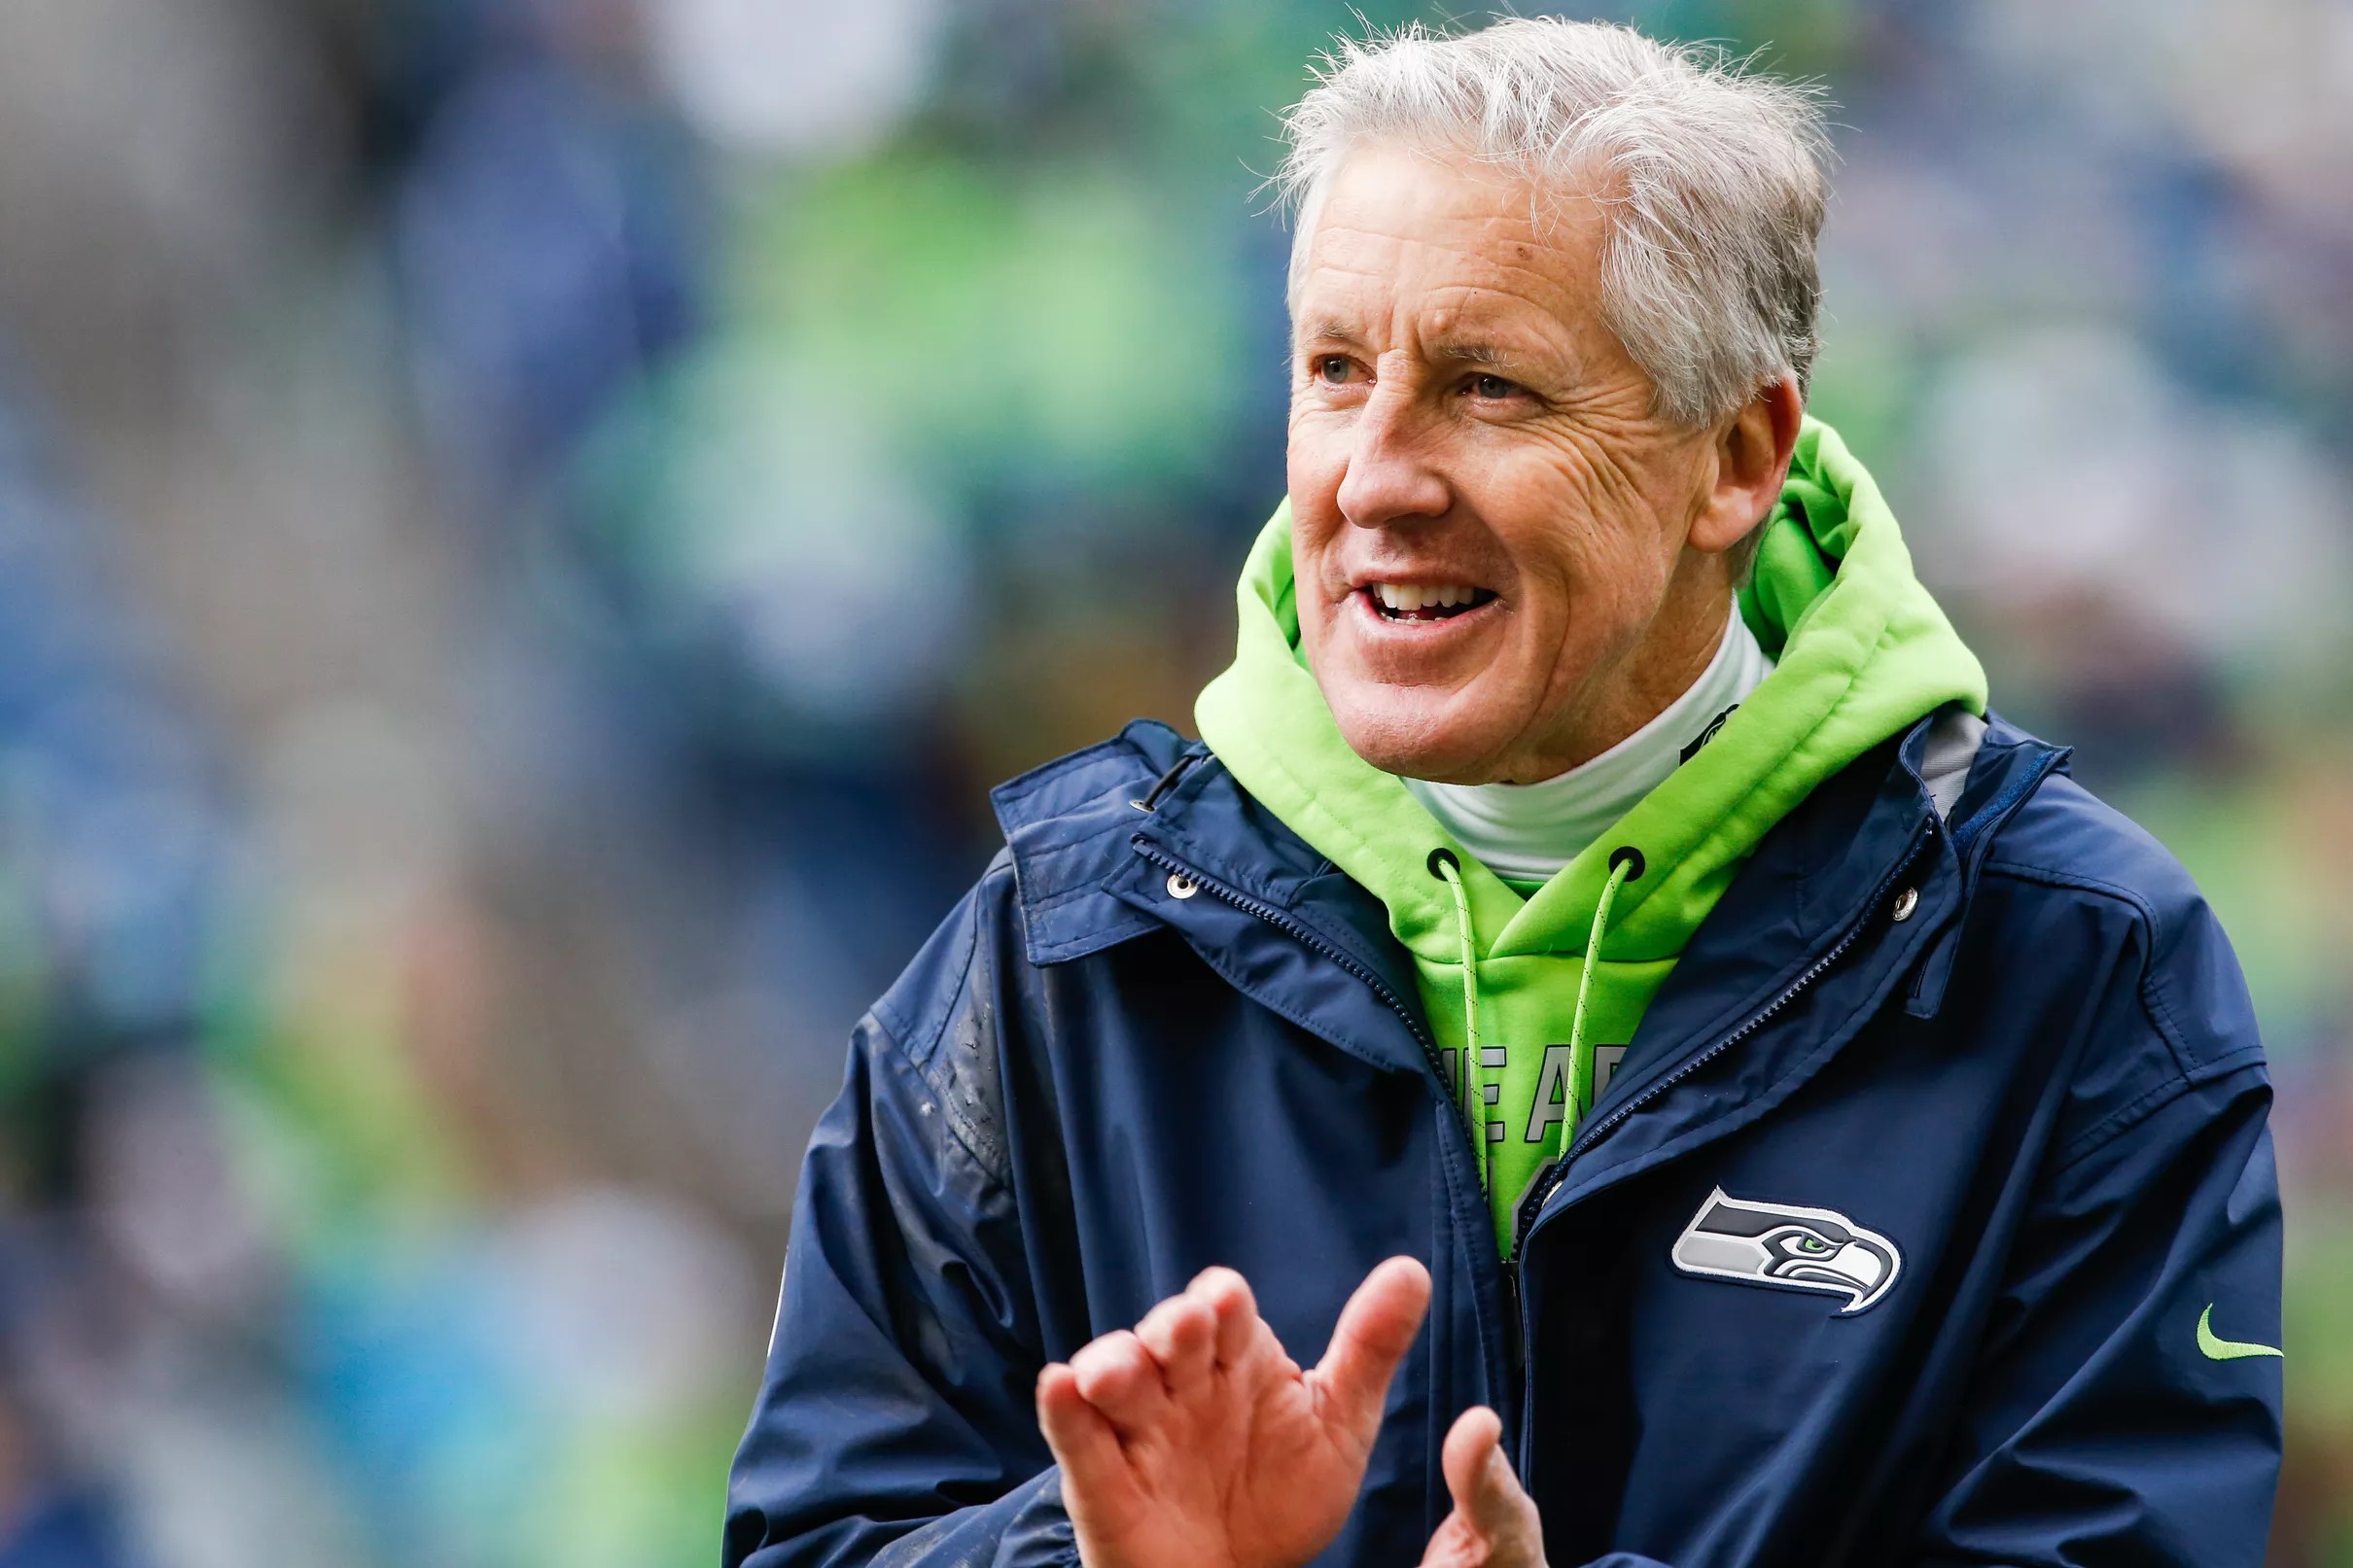 NFL Honors 2019 Pete Carroll finishes fifth in Coach of the Year voting